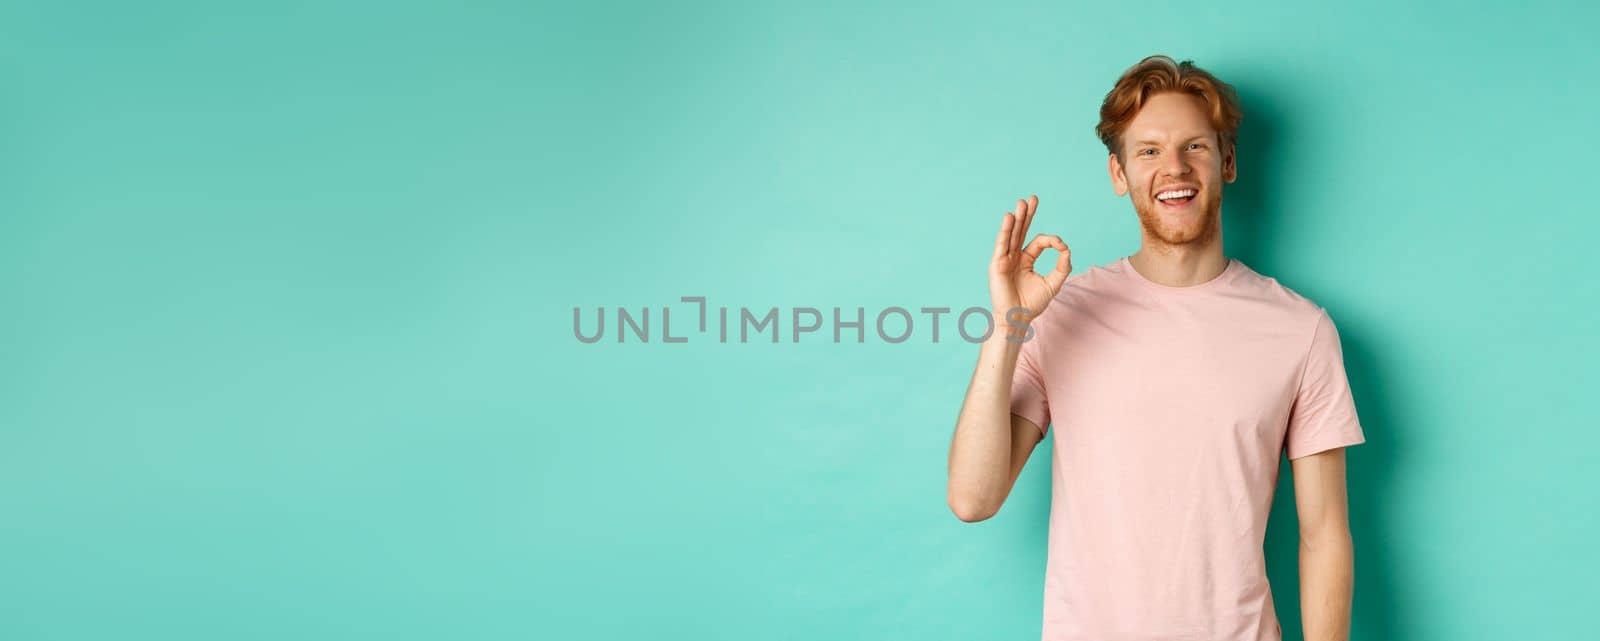 Handsome young bearded man in t-shirt showing Ok sign, smiling with white teeth and saying yes, agree with you, standing over turquoise background.